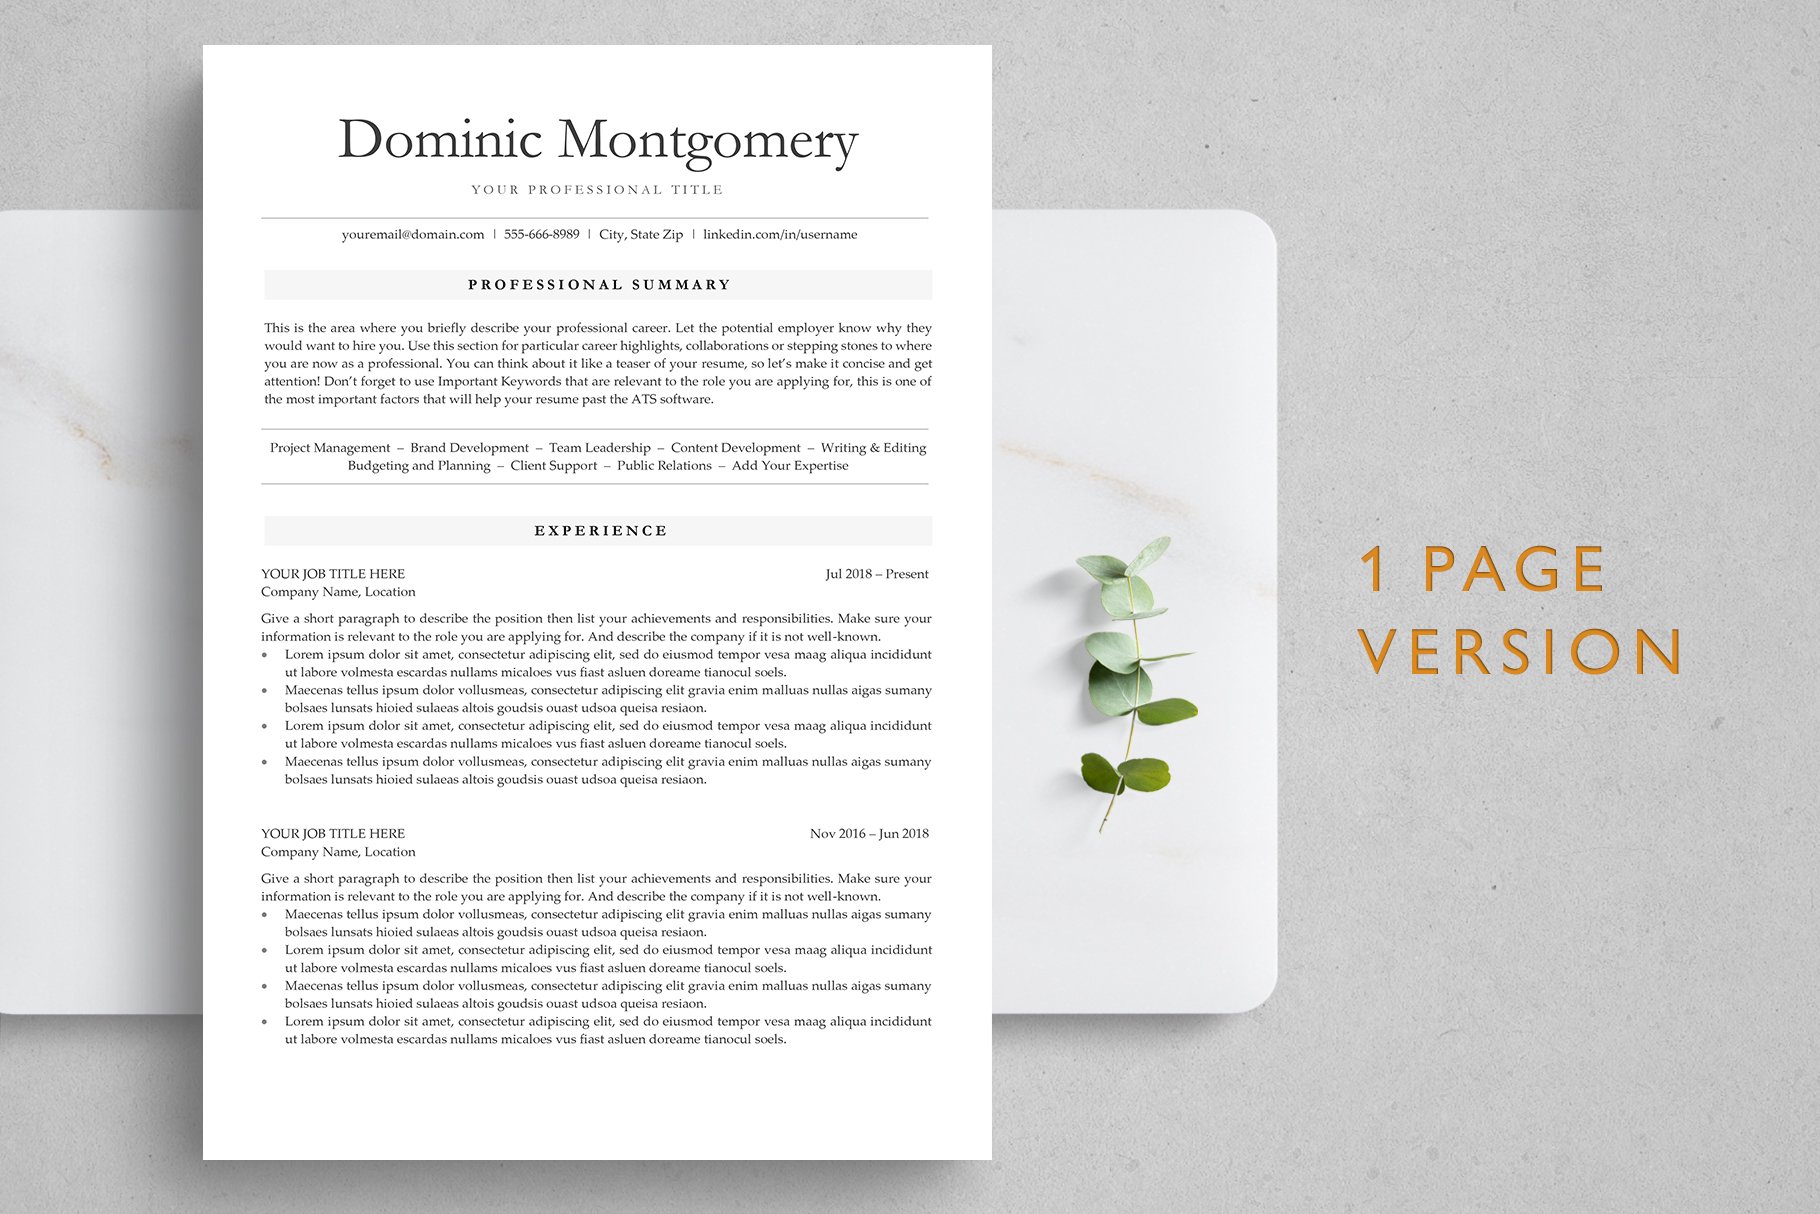 ATS Resume Template - DOMINIC preview image.